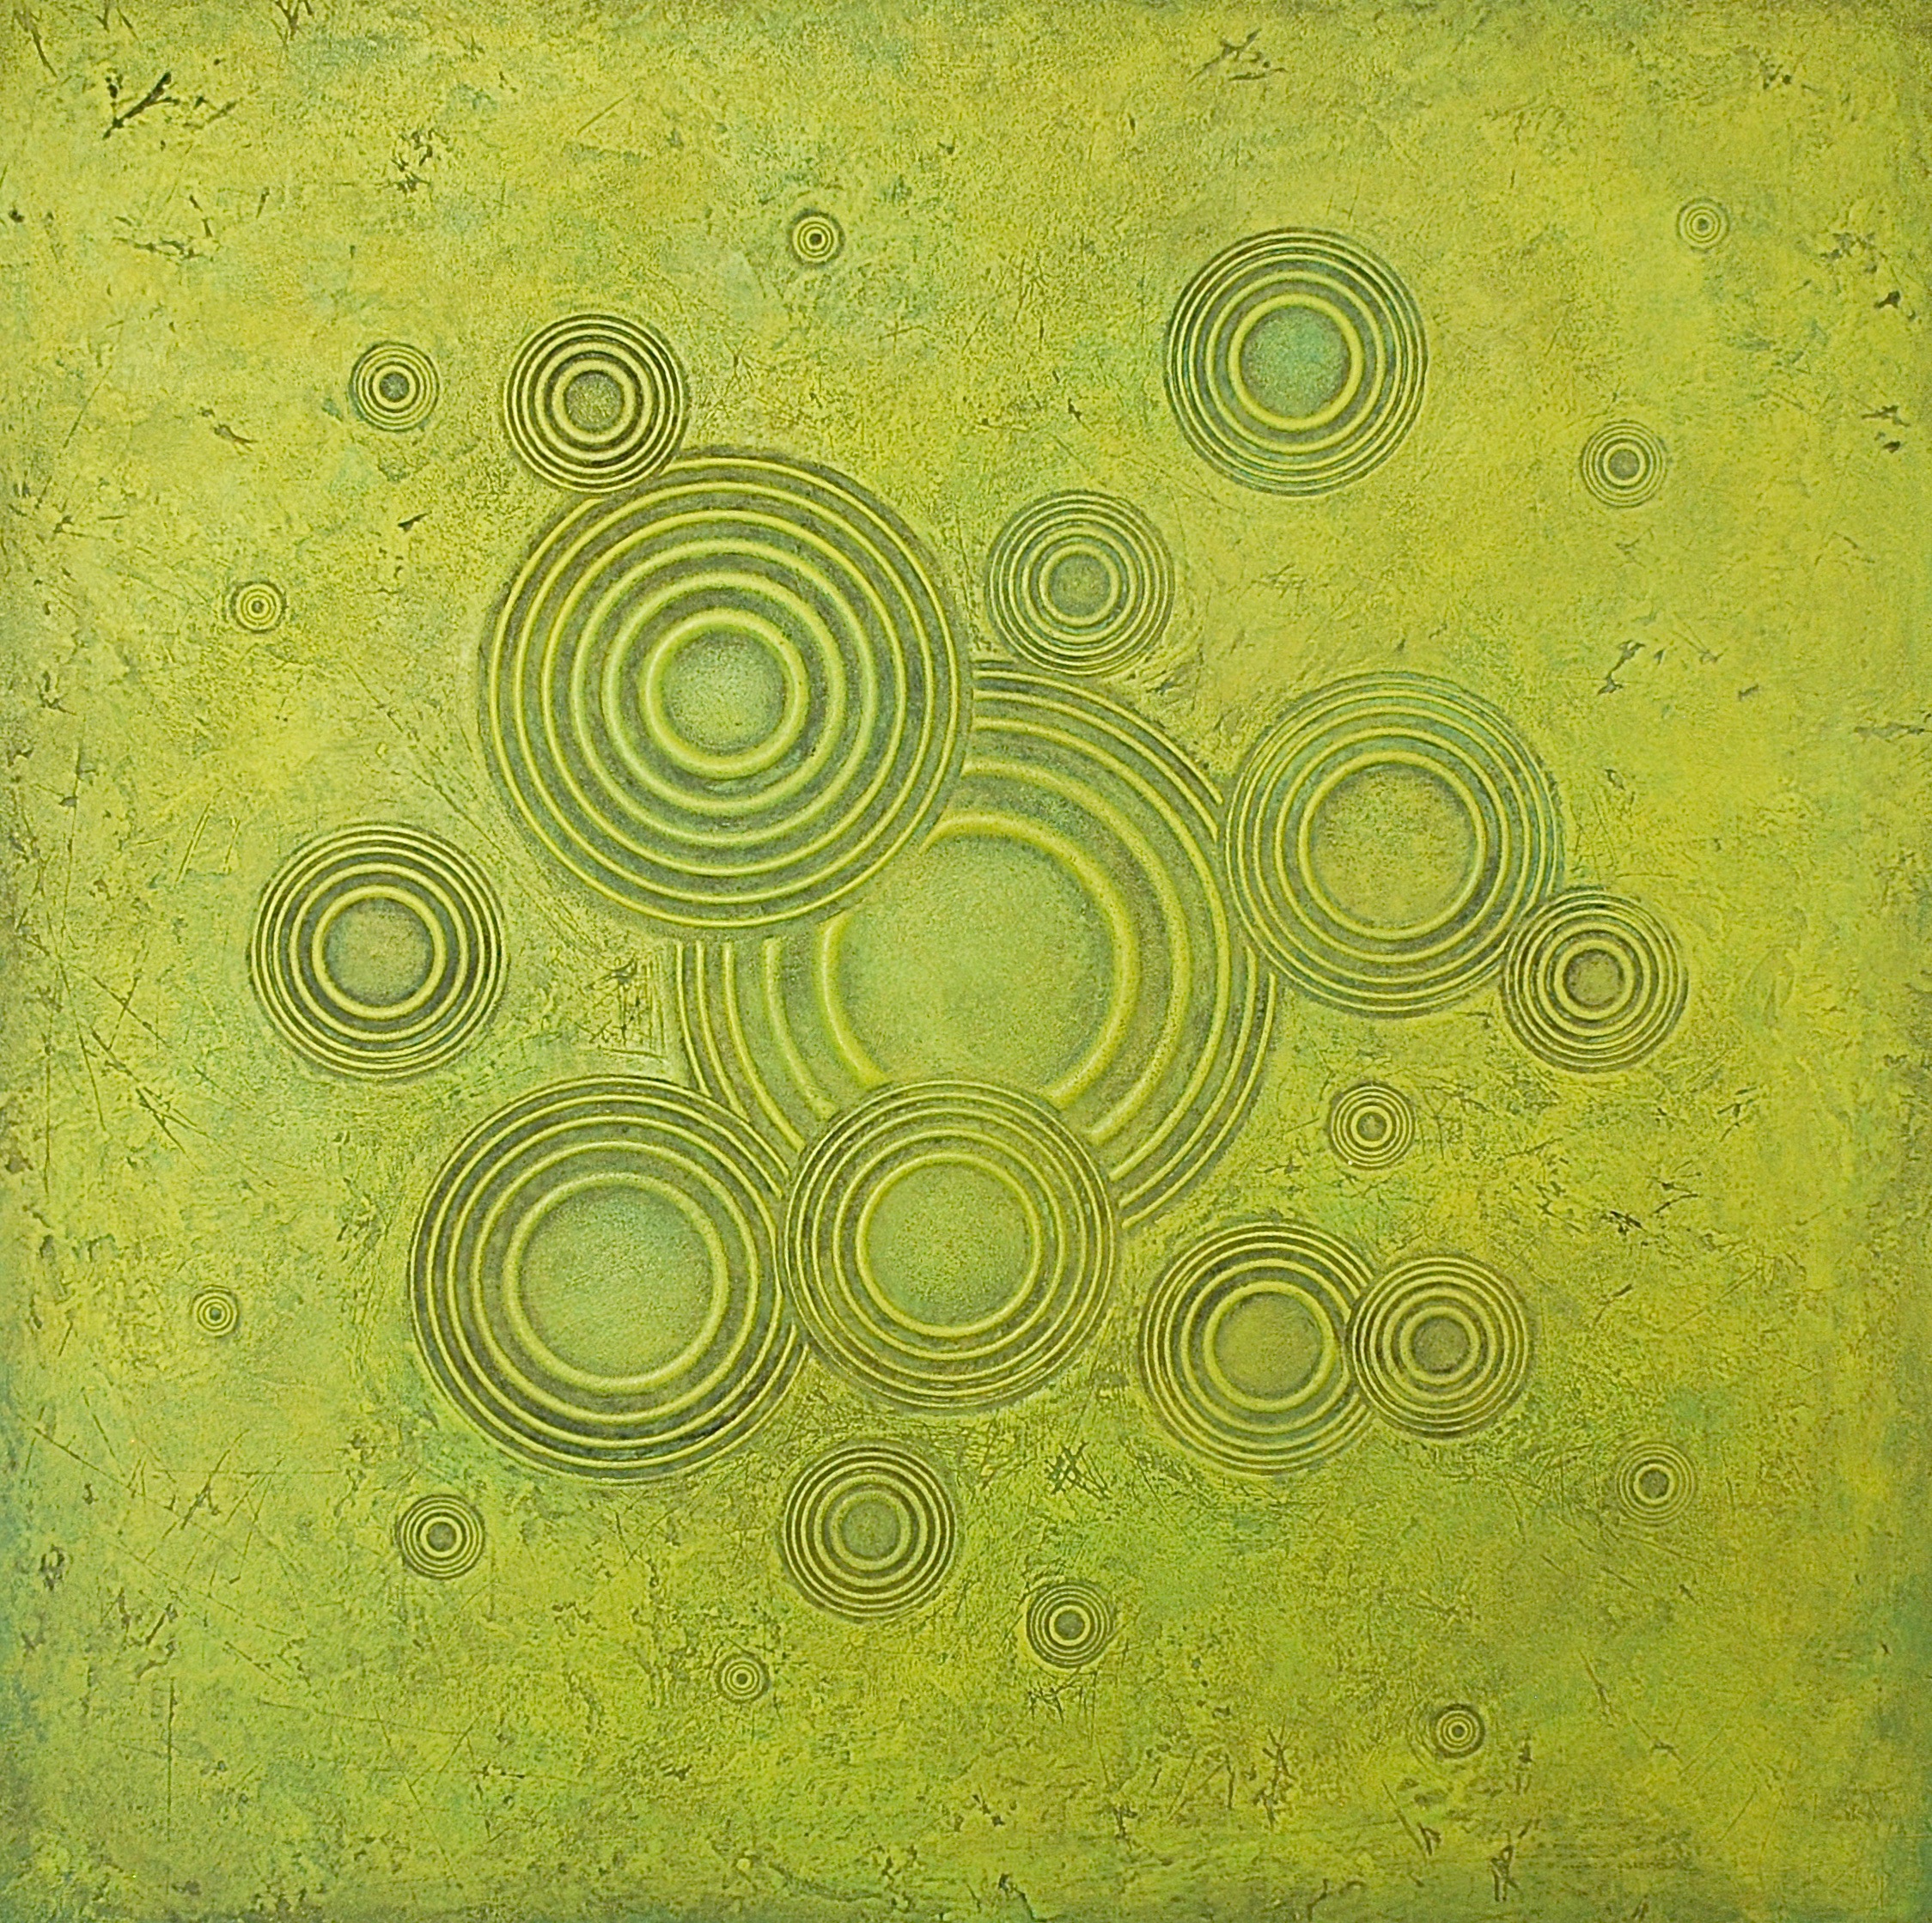 Thomas Coffin - Ripple Effect (chartreuse), 36"h x 36" w x 2"d, mixed media sculptural wall relief